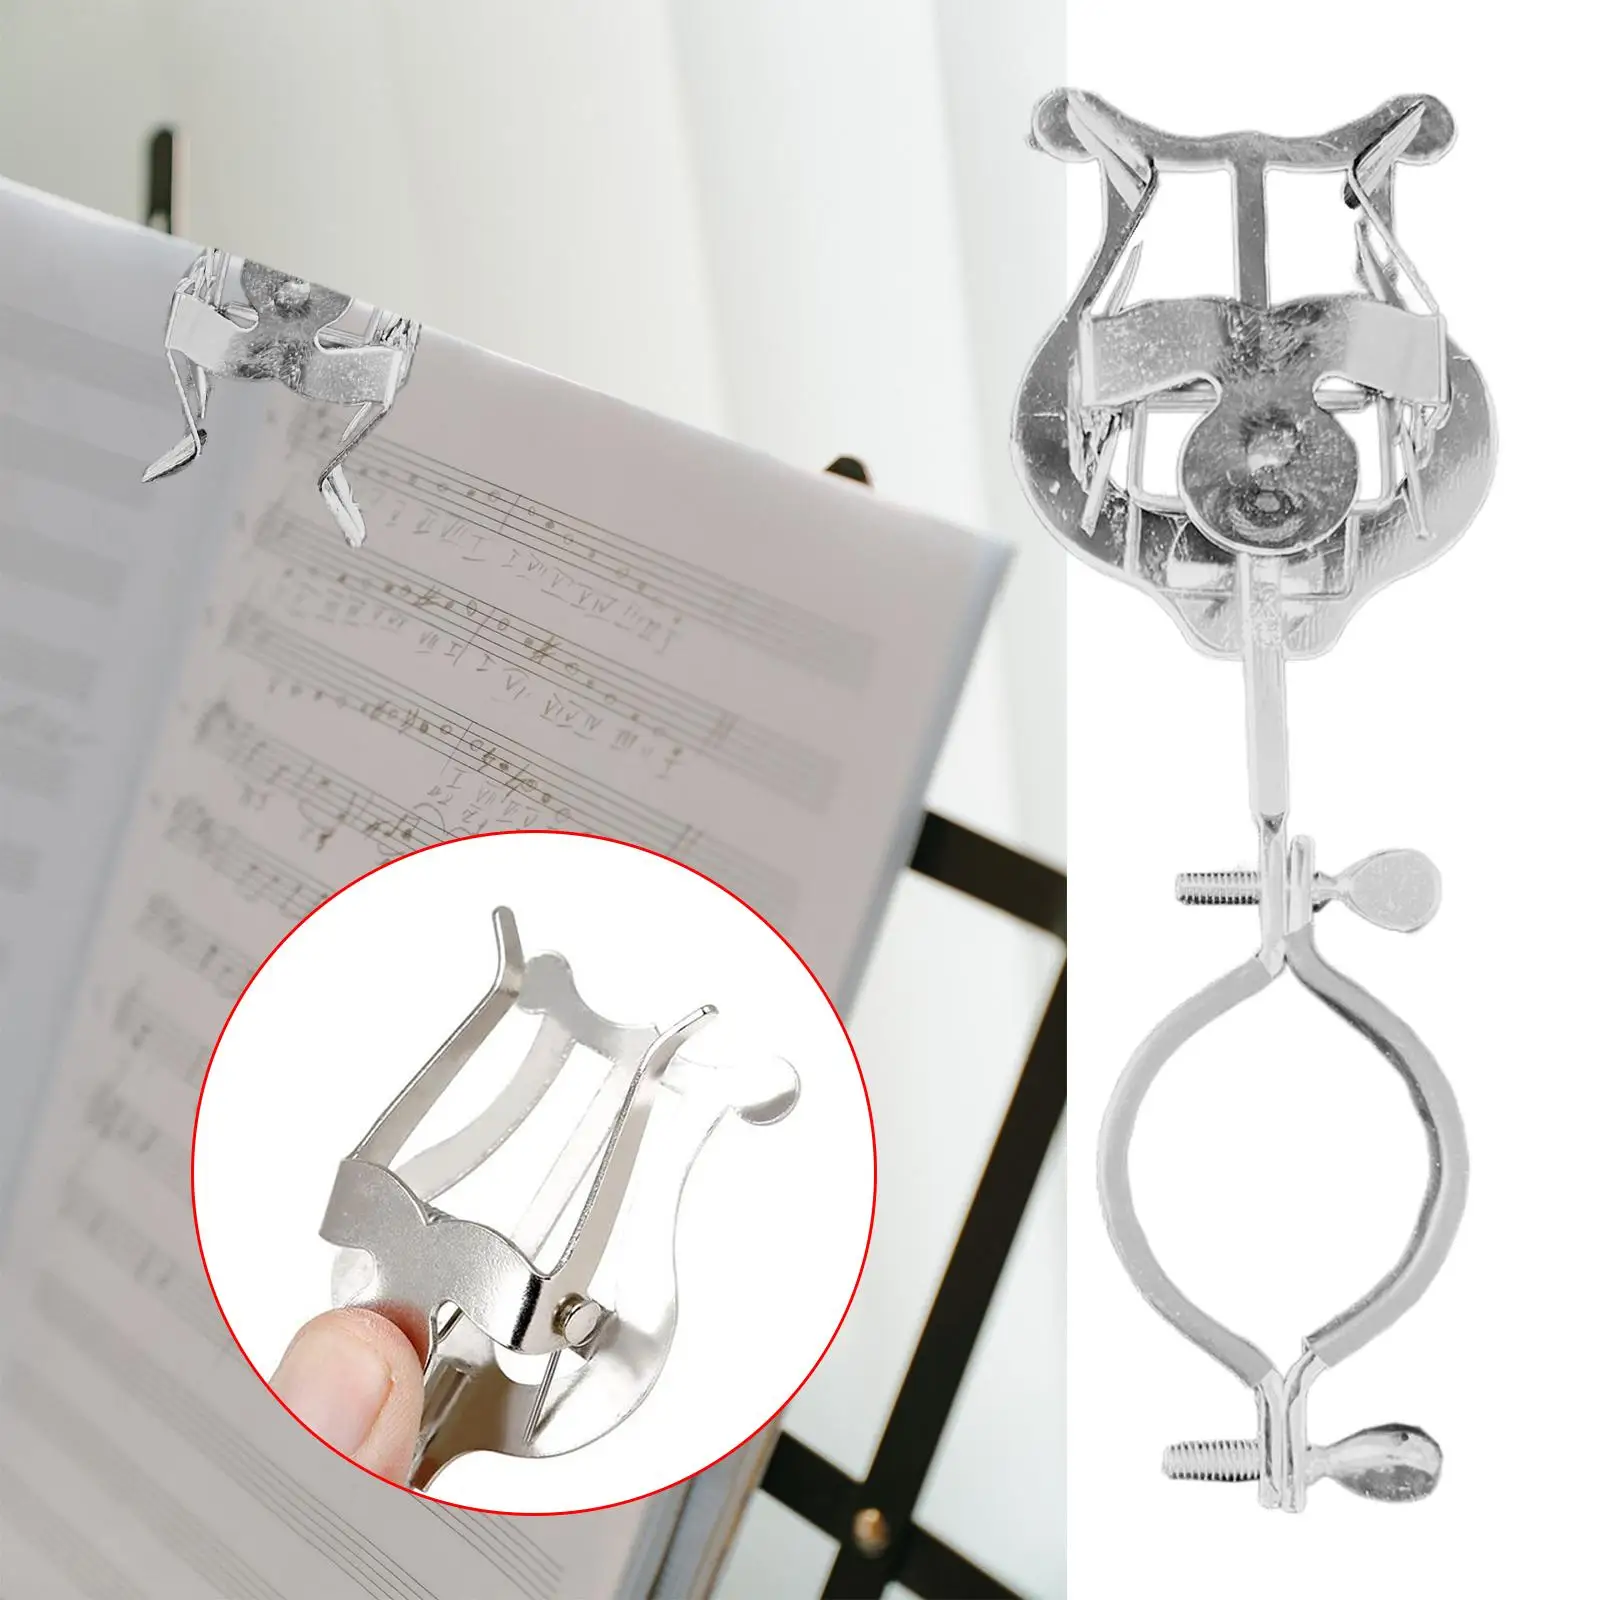 Clarinet Music Clip Practicing Beginners Marching Clamp Wind Instrument Metal Sheet Music Clip Clamp Replacements Accessory